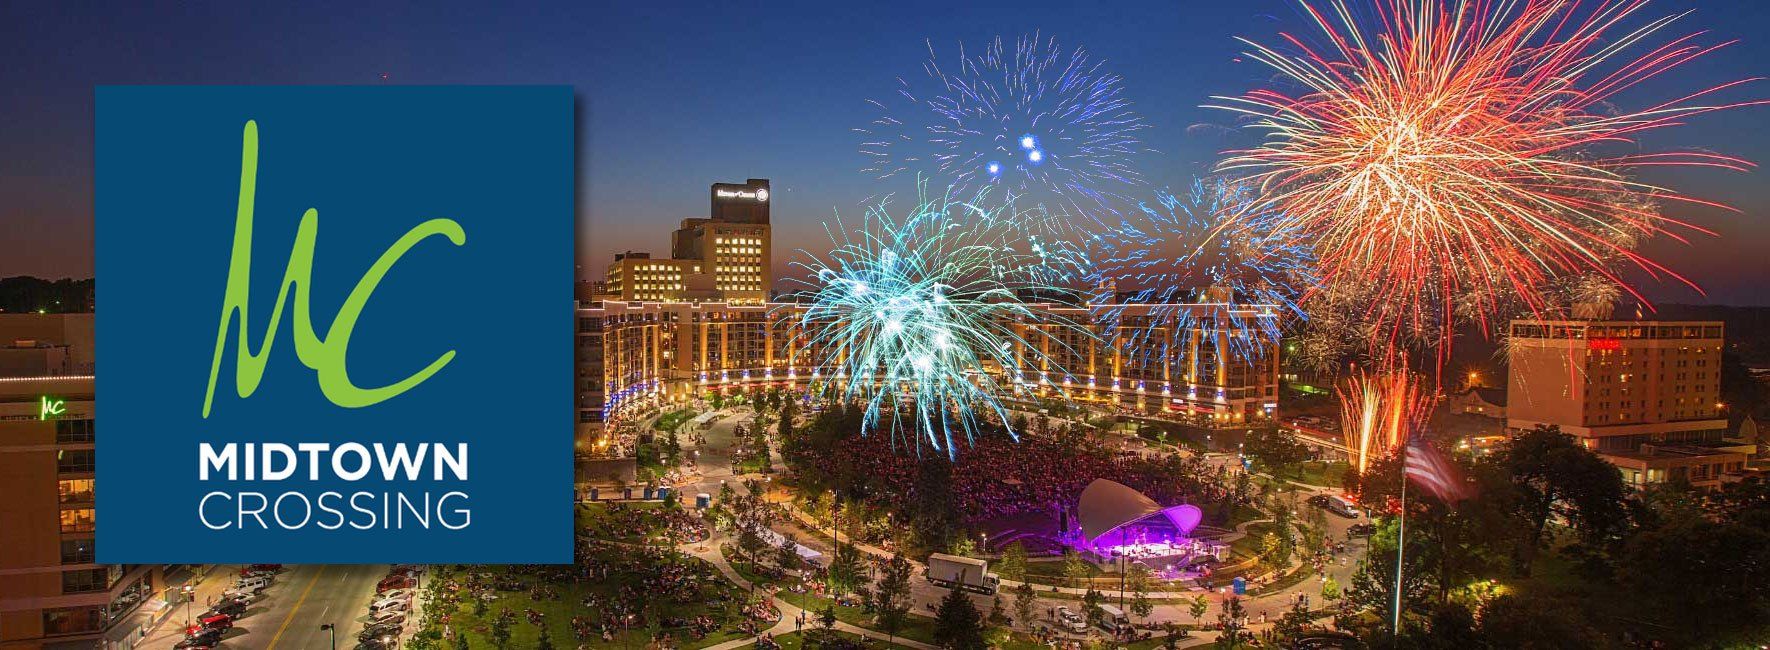 A logo for midtown crossing with fireworks in the background